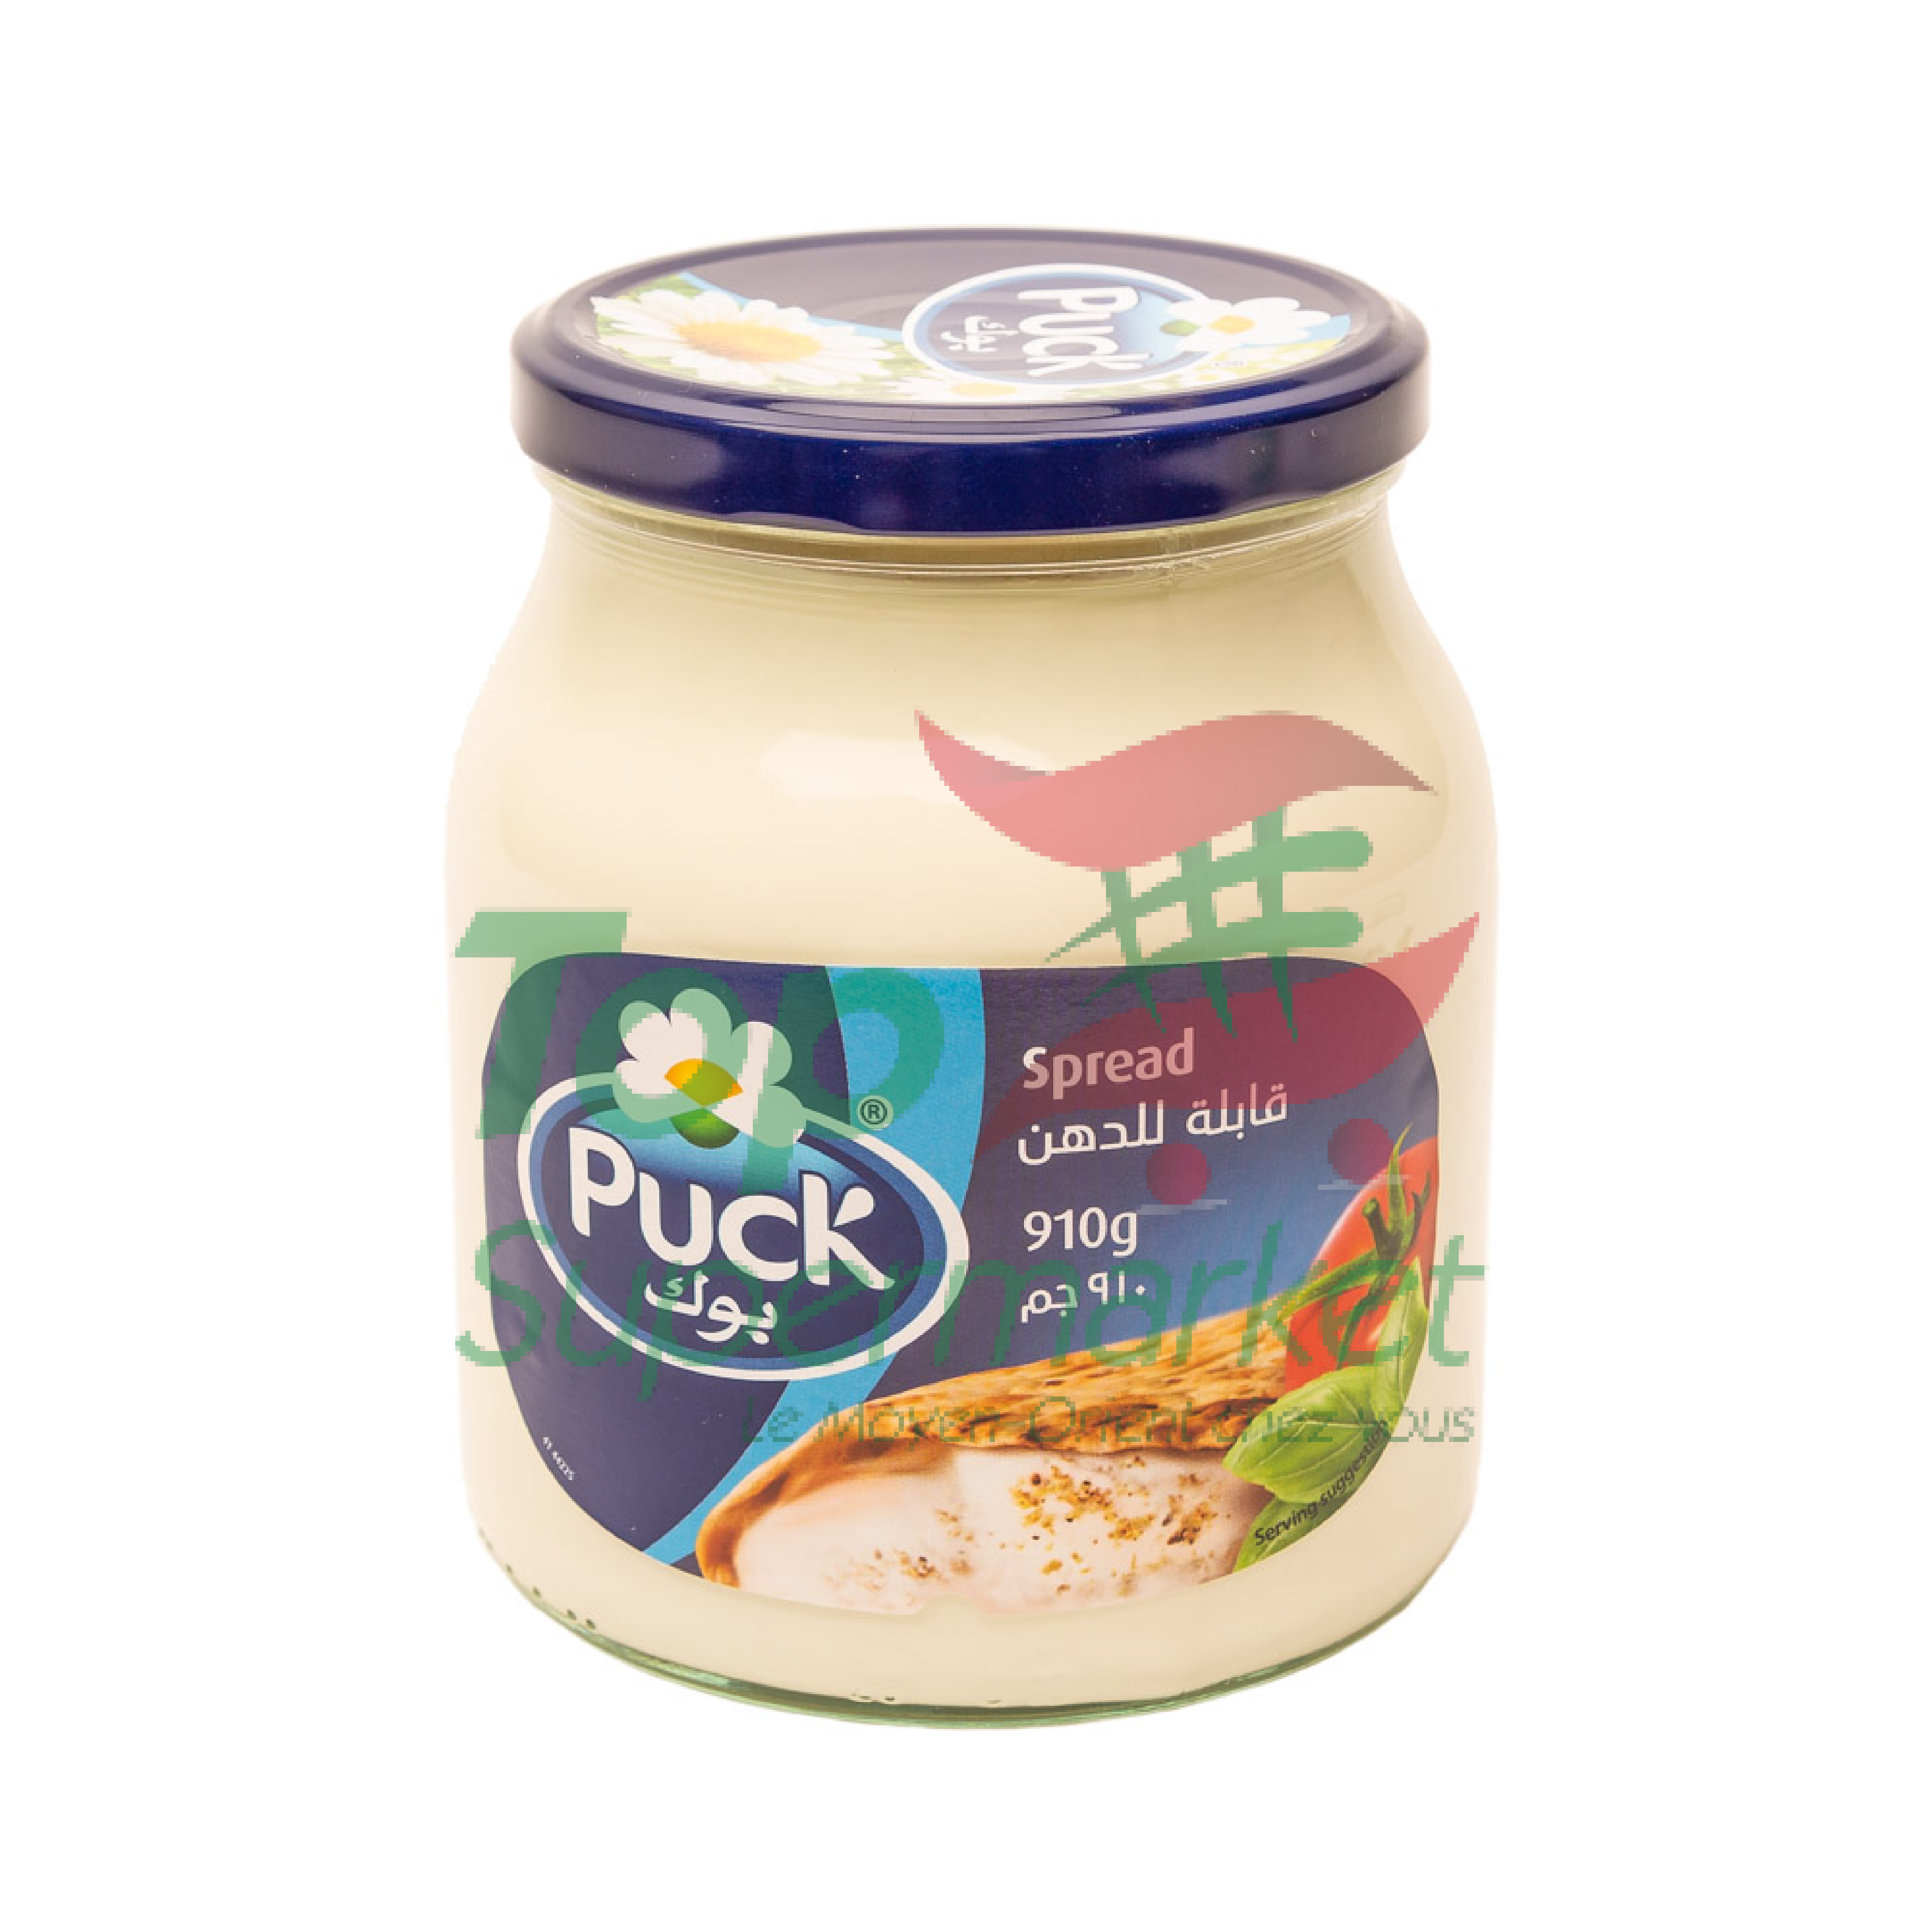 Puck Fromage 910g